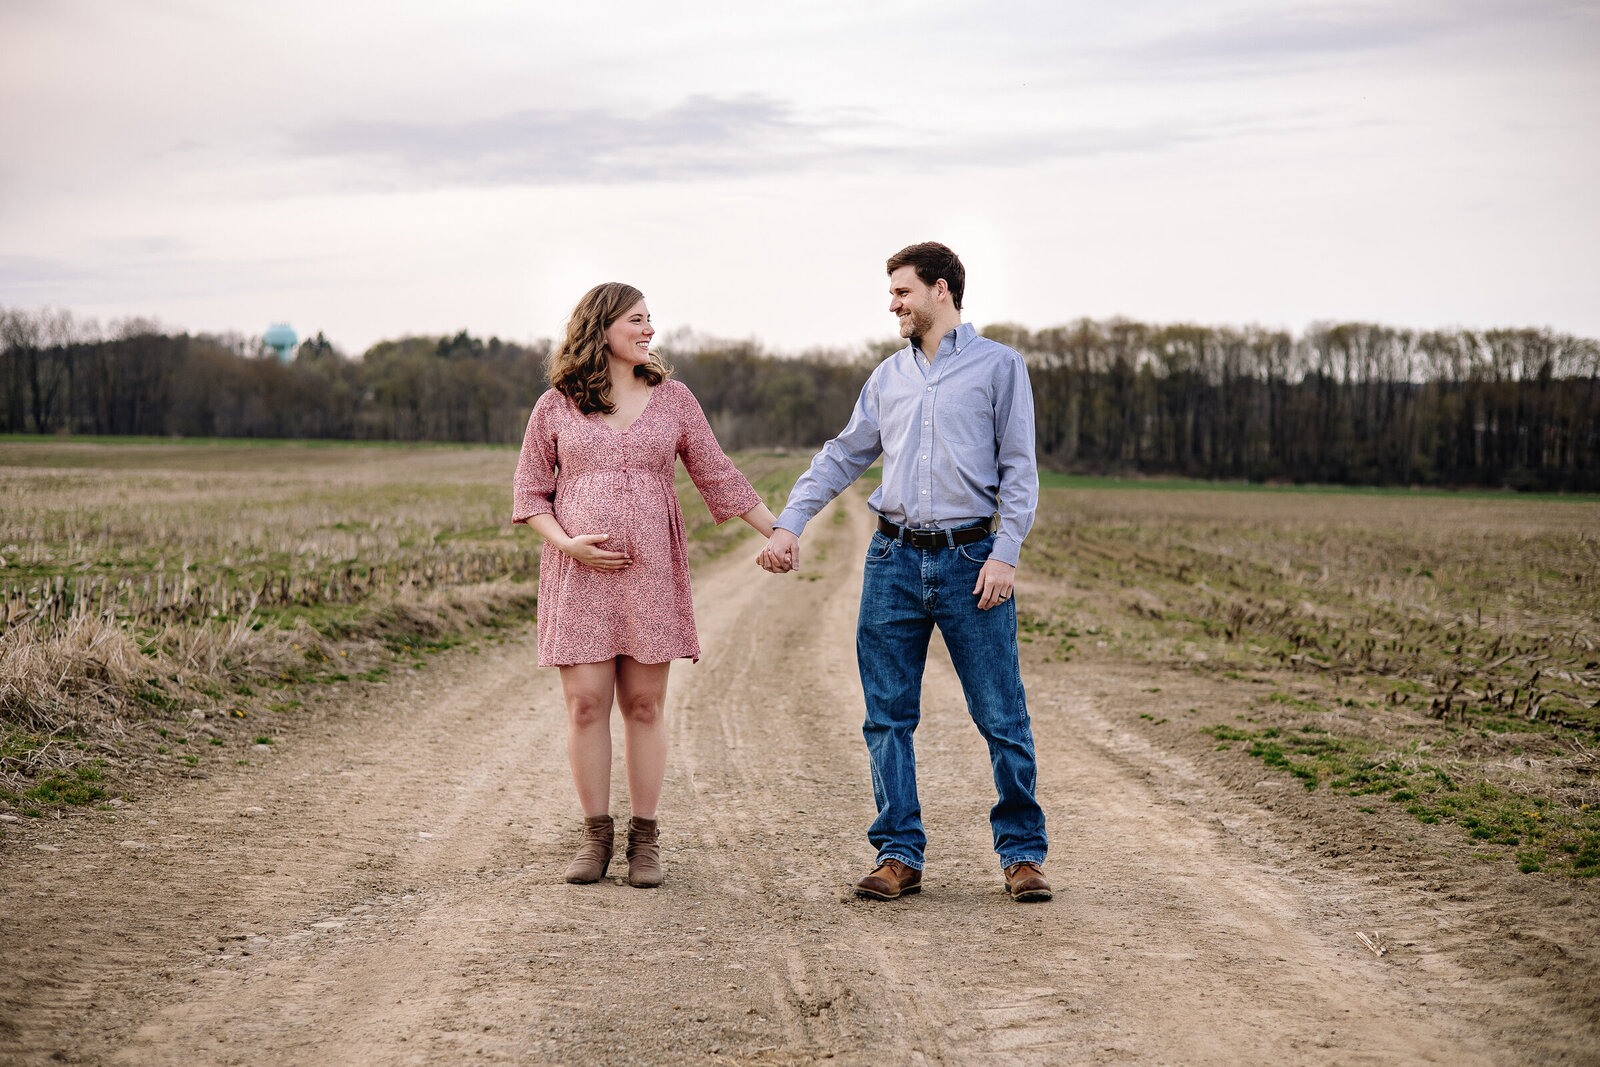 Expectant parents stand hand in hand on a country road